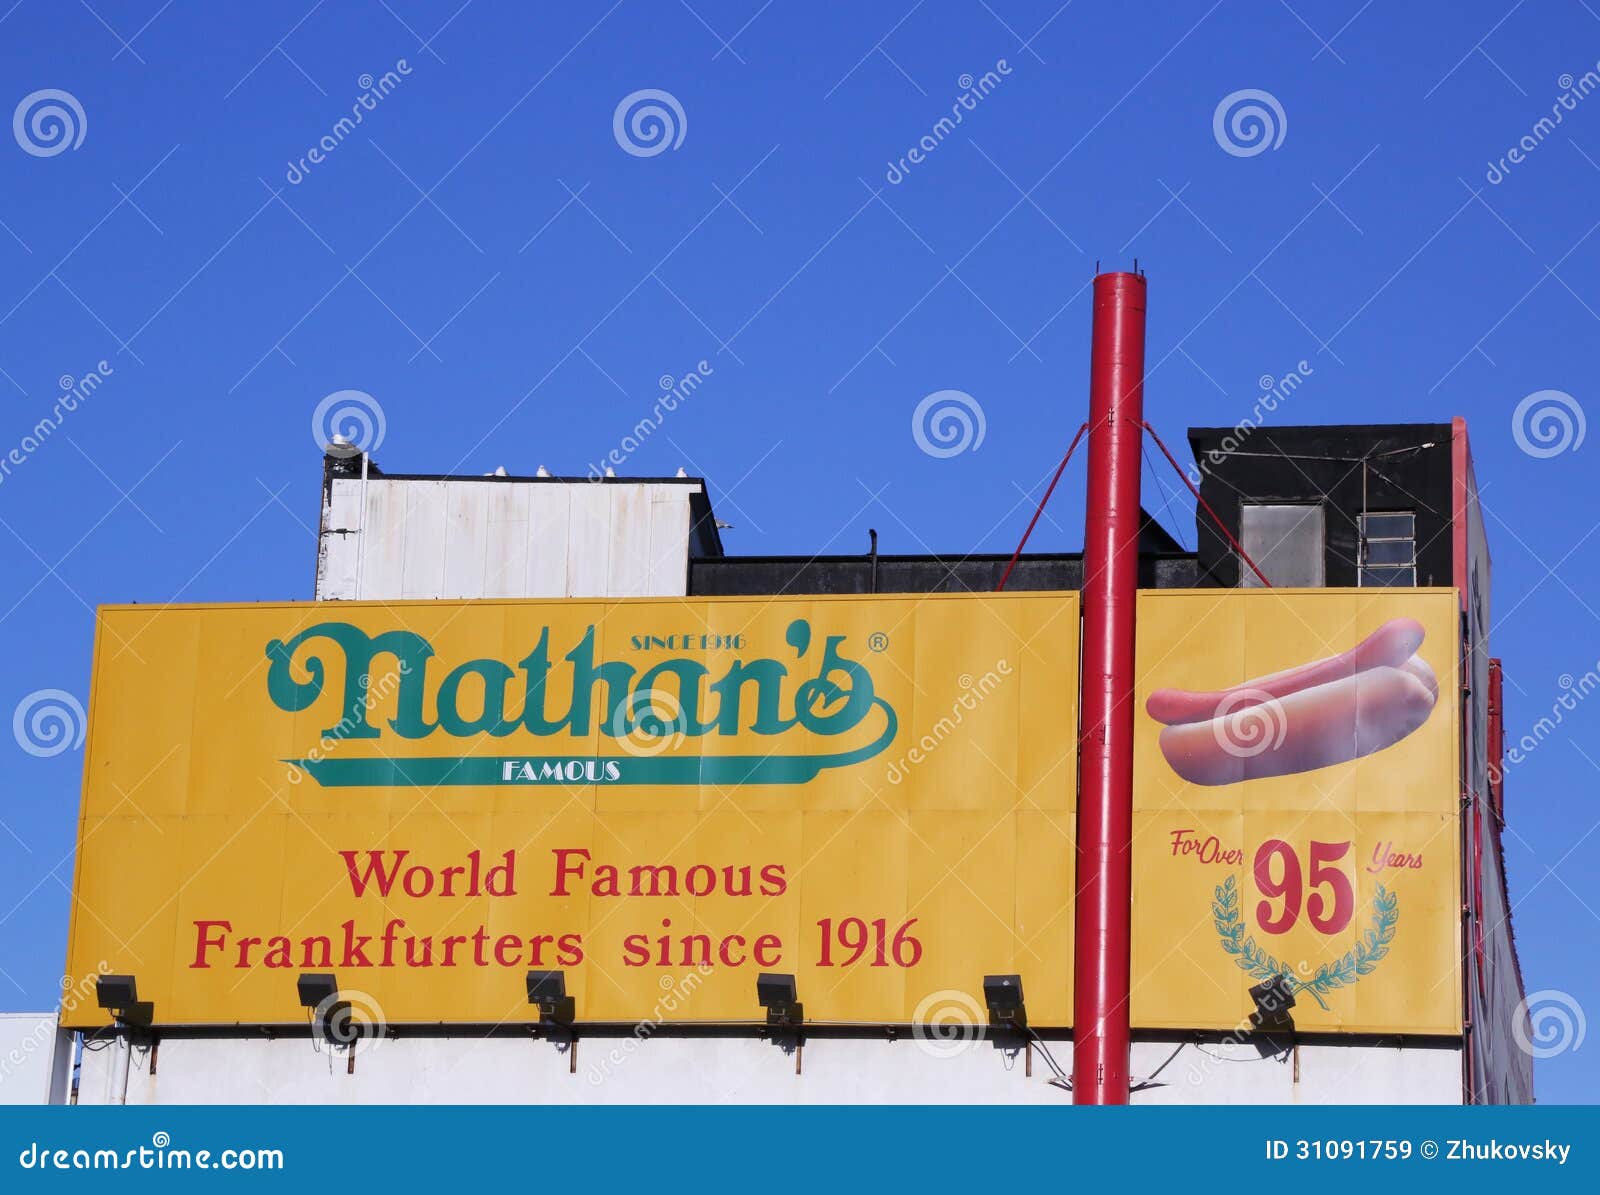 The Nathan S Original Restaurant Sign Editorial Stock Image - Image of ...